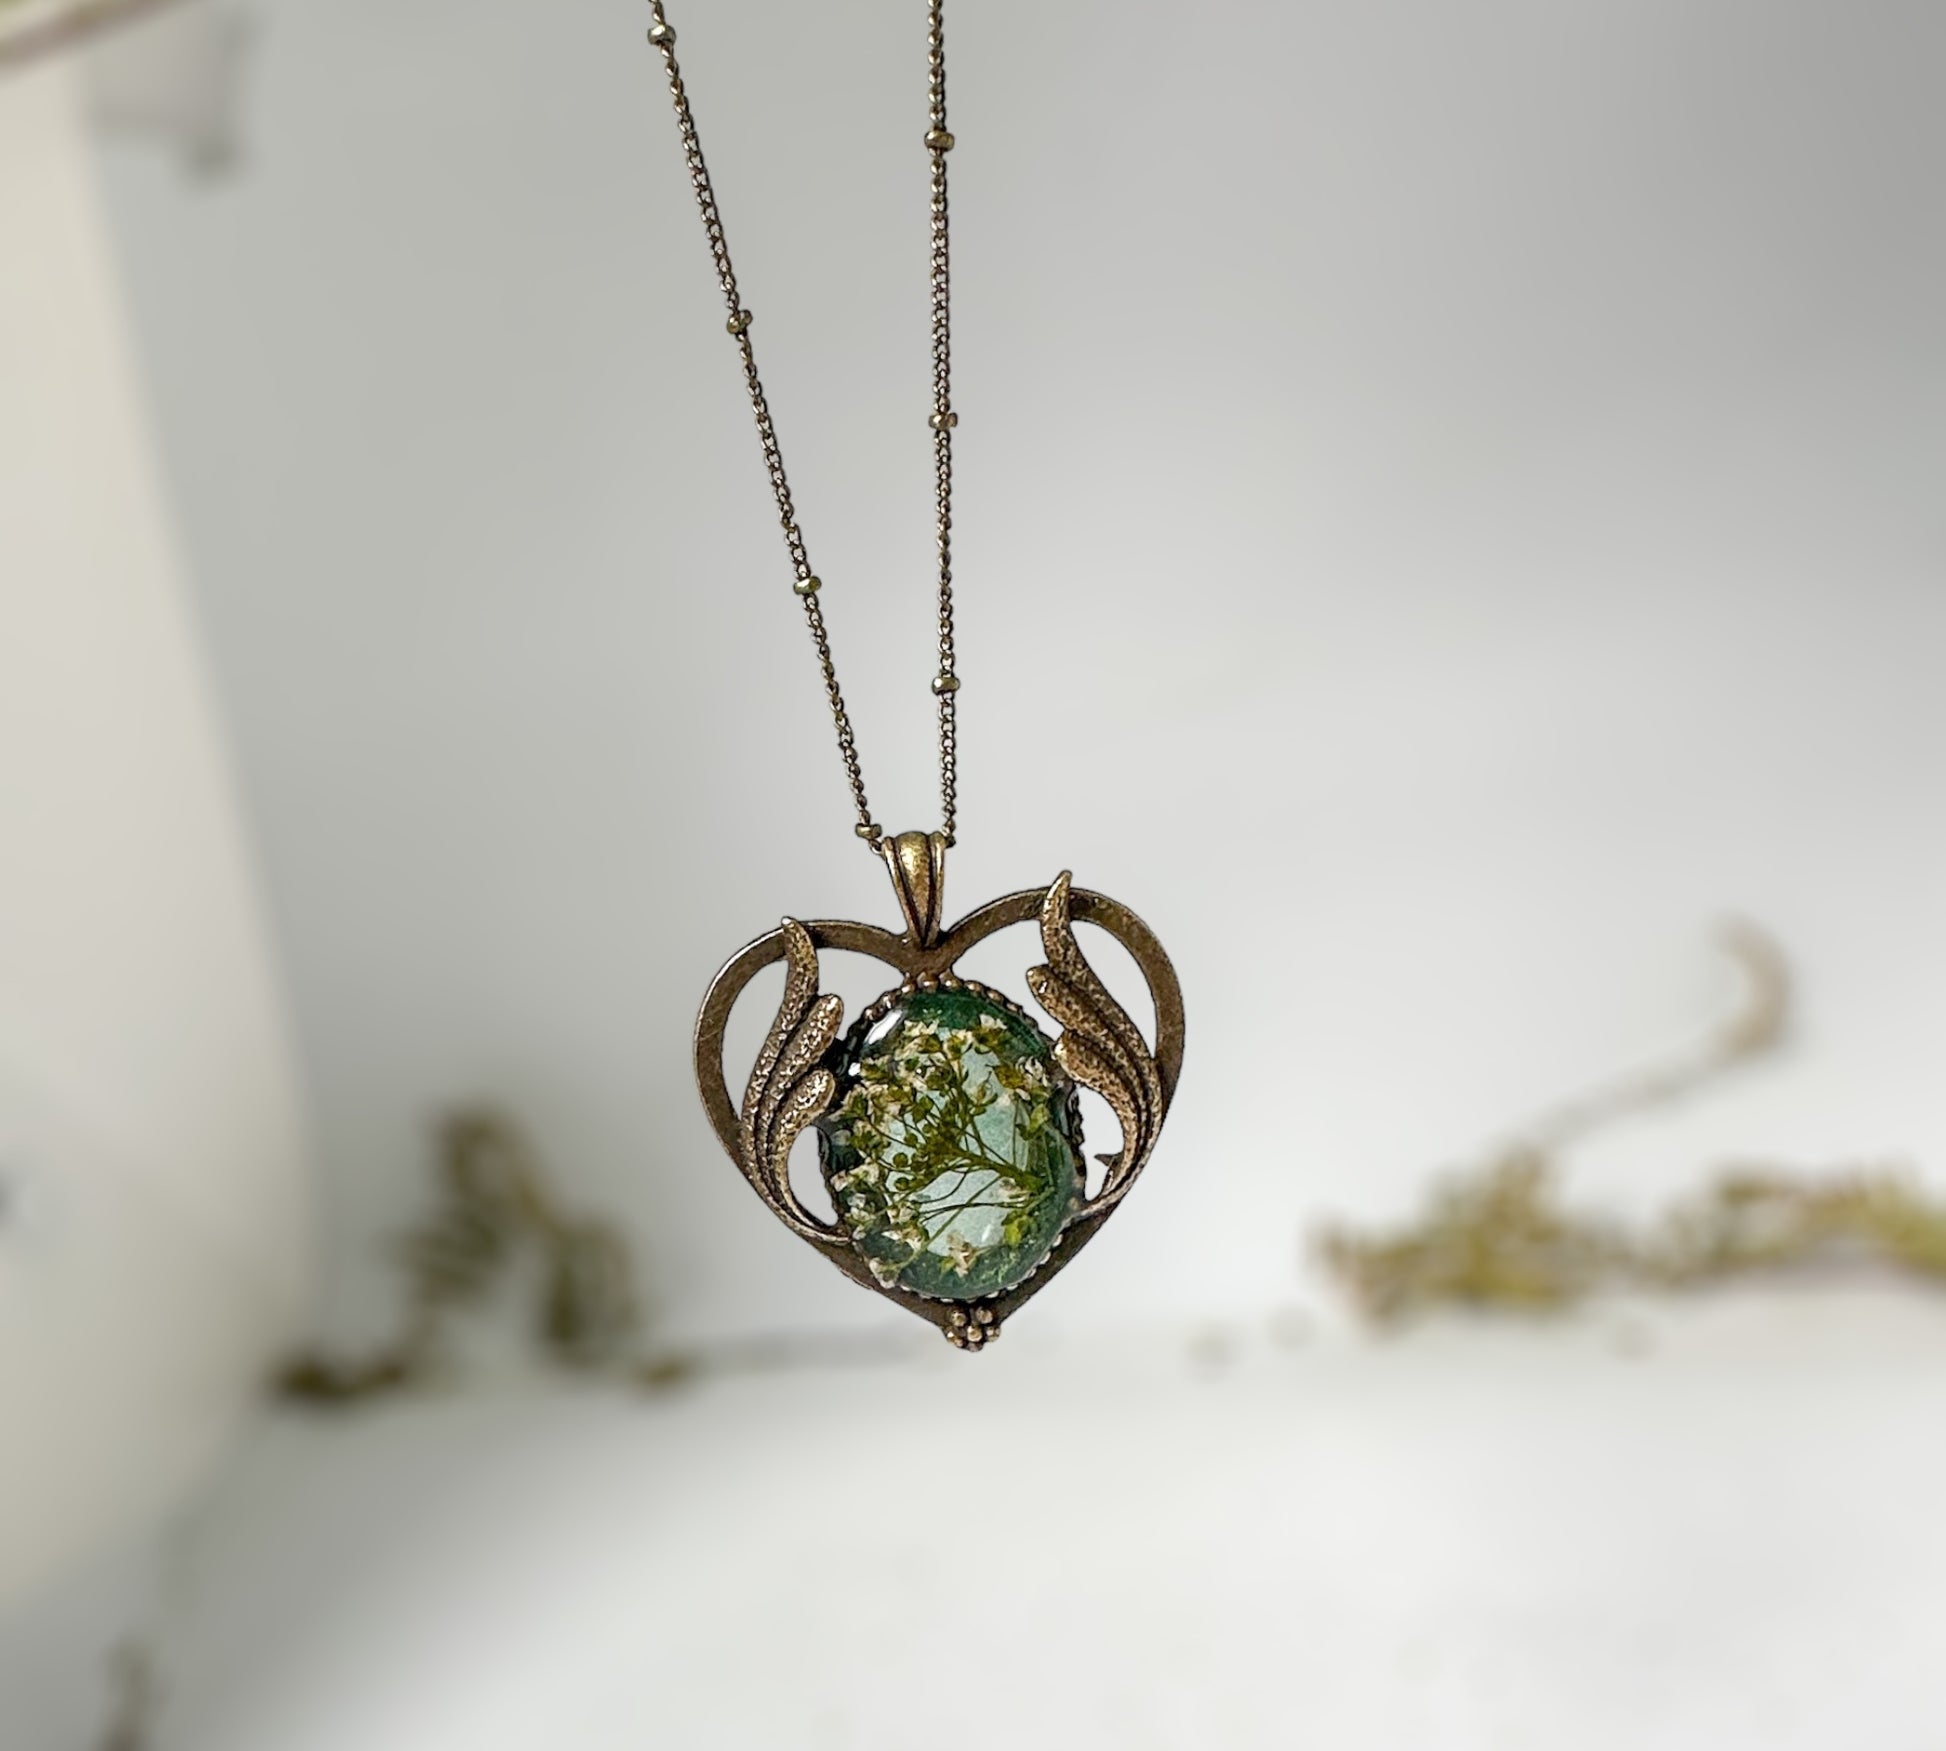 Antique Bronze Heart Necklace with Pressed Flowers -Botanical Elegance